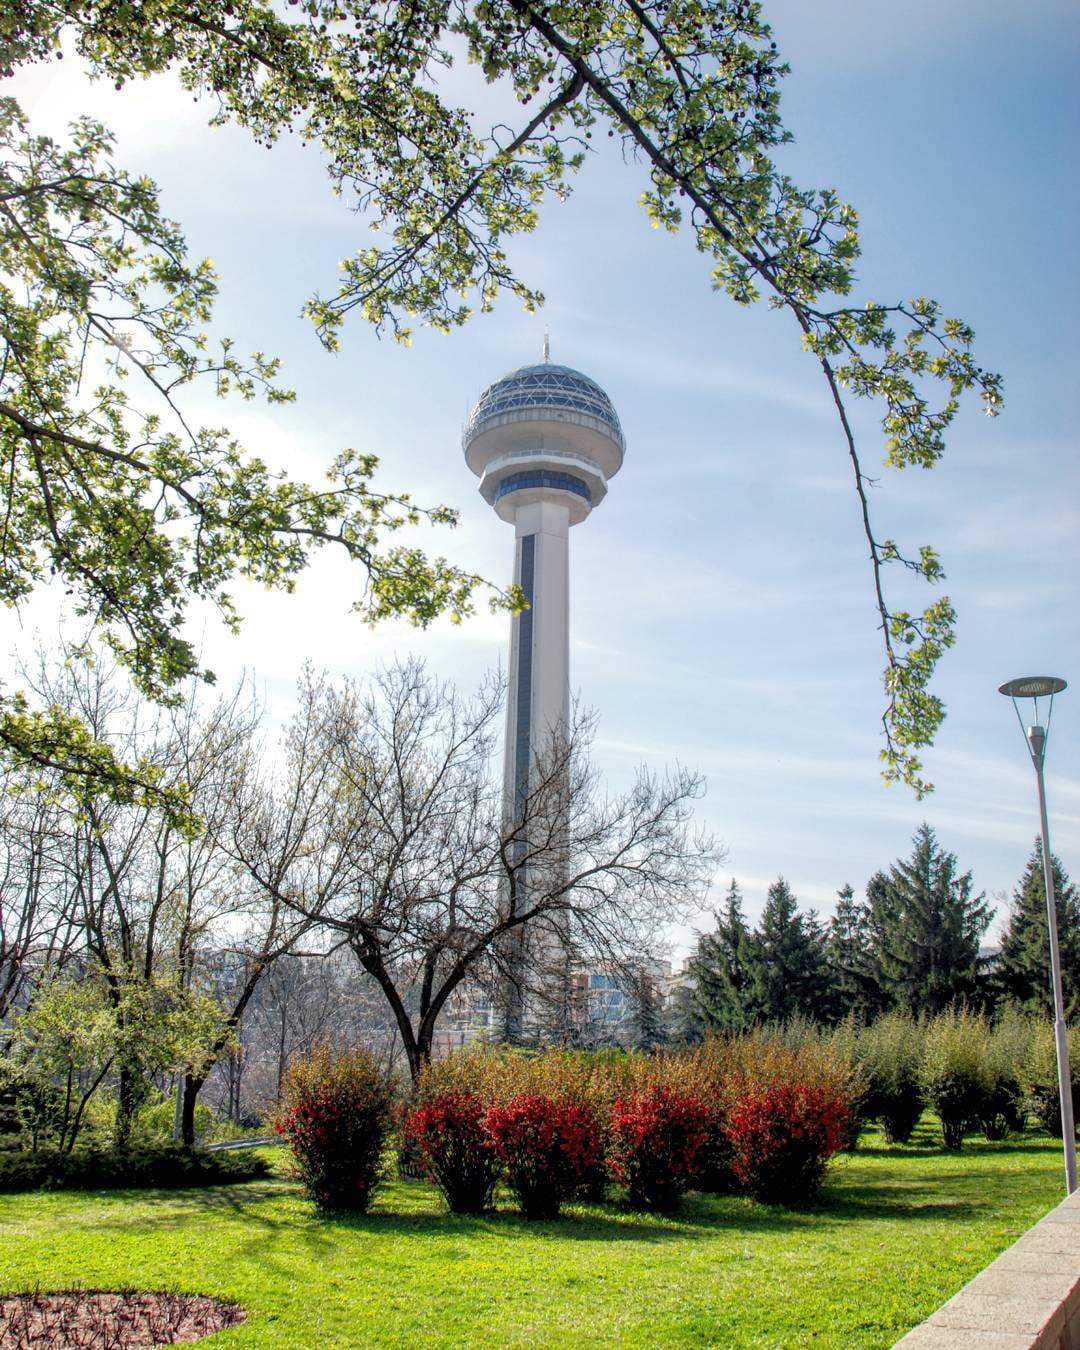 Take the high-speed elevator to the observation deck of Atakule Tower for an amazing view of Ankara.